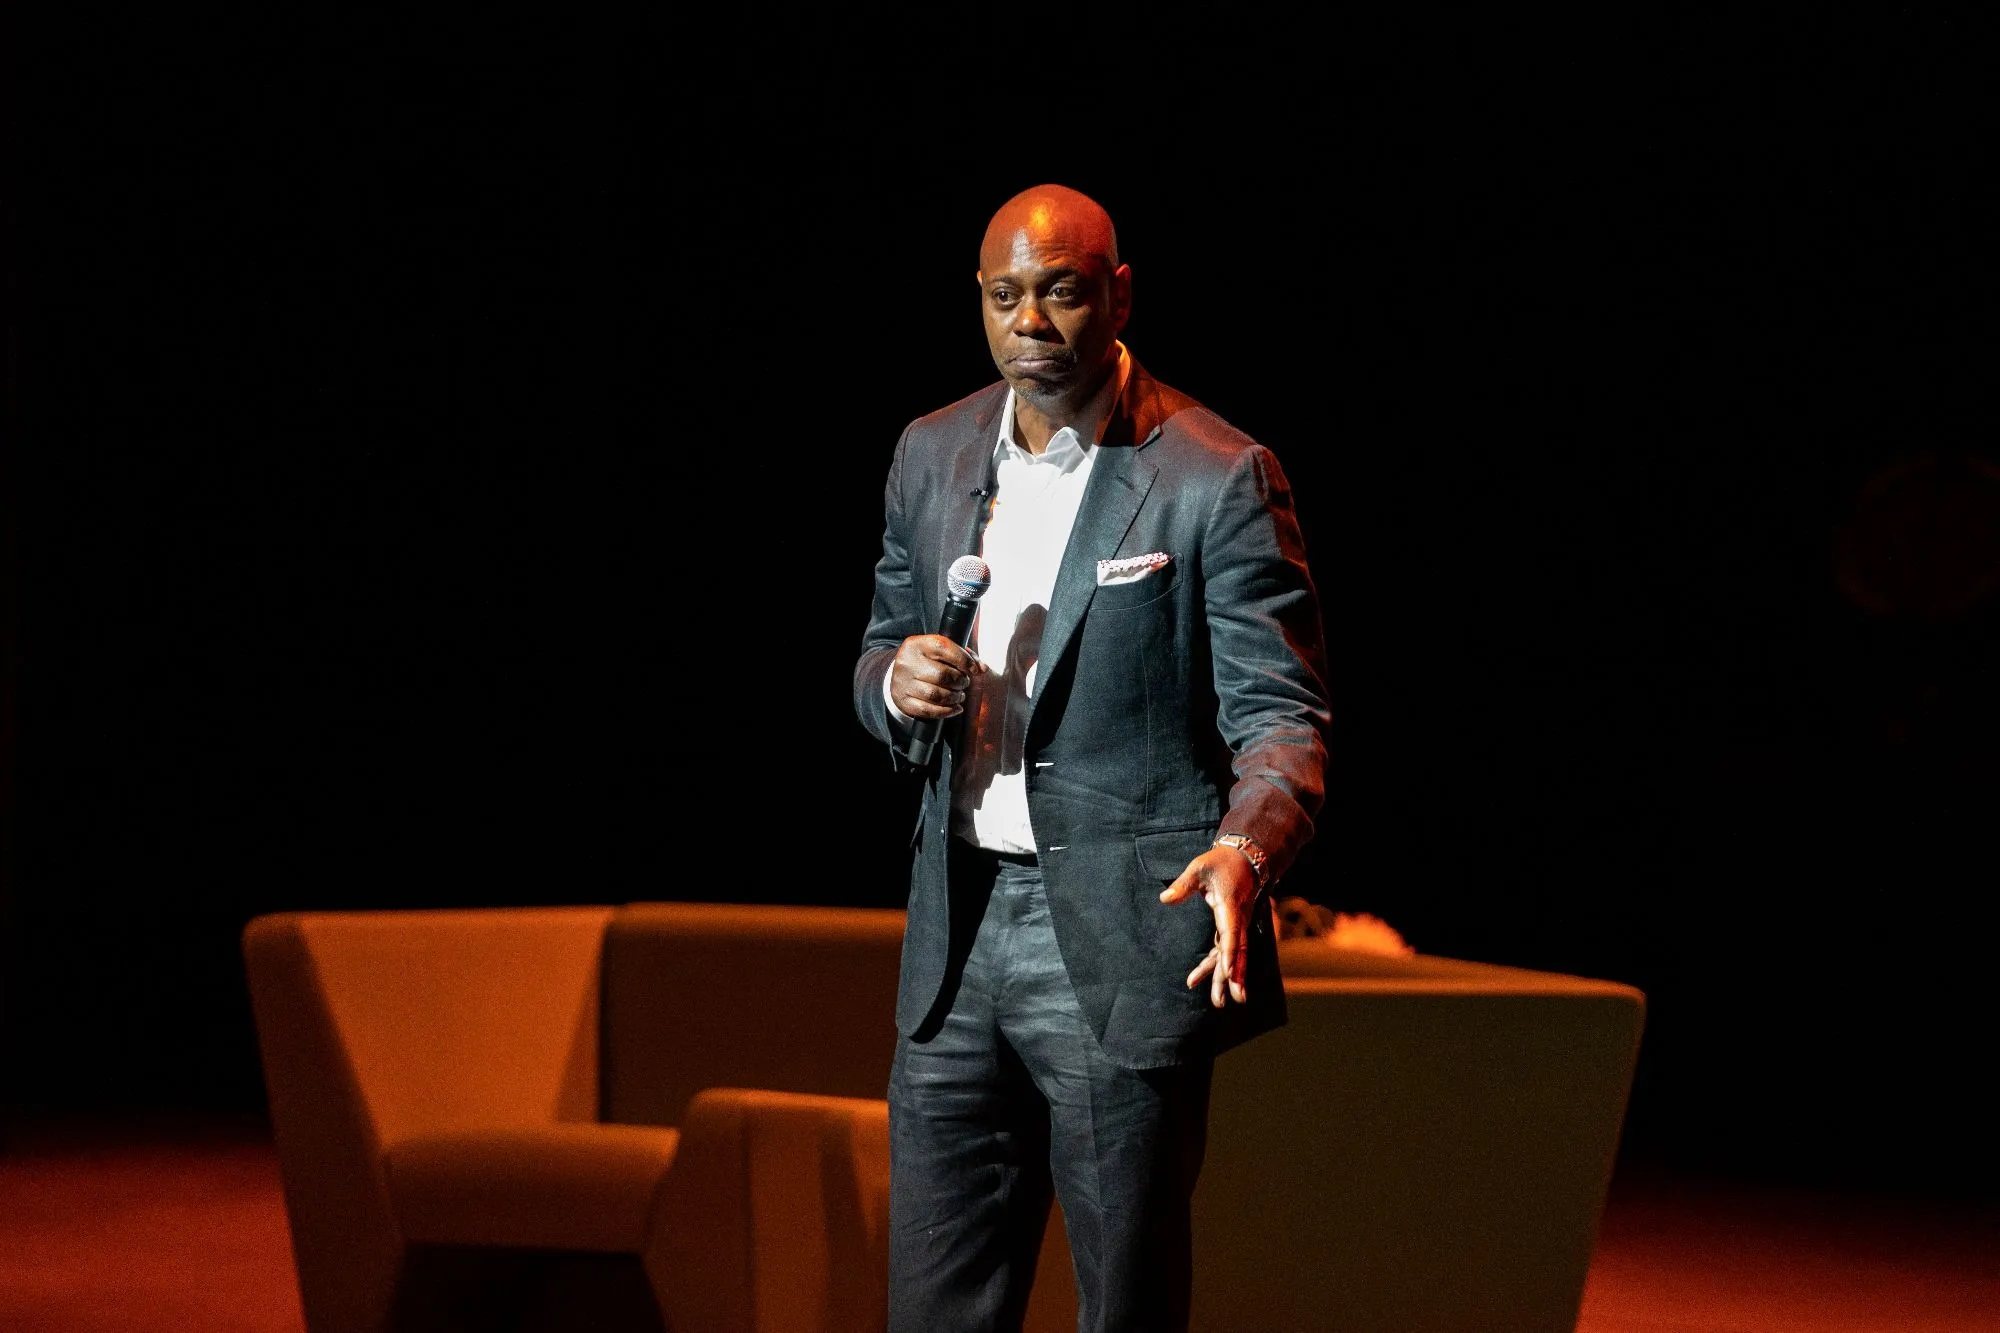 dave-chappelle-criticizes-israel-sparks-walk-outs-in-boston-show